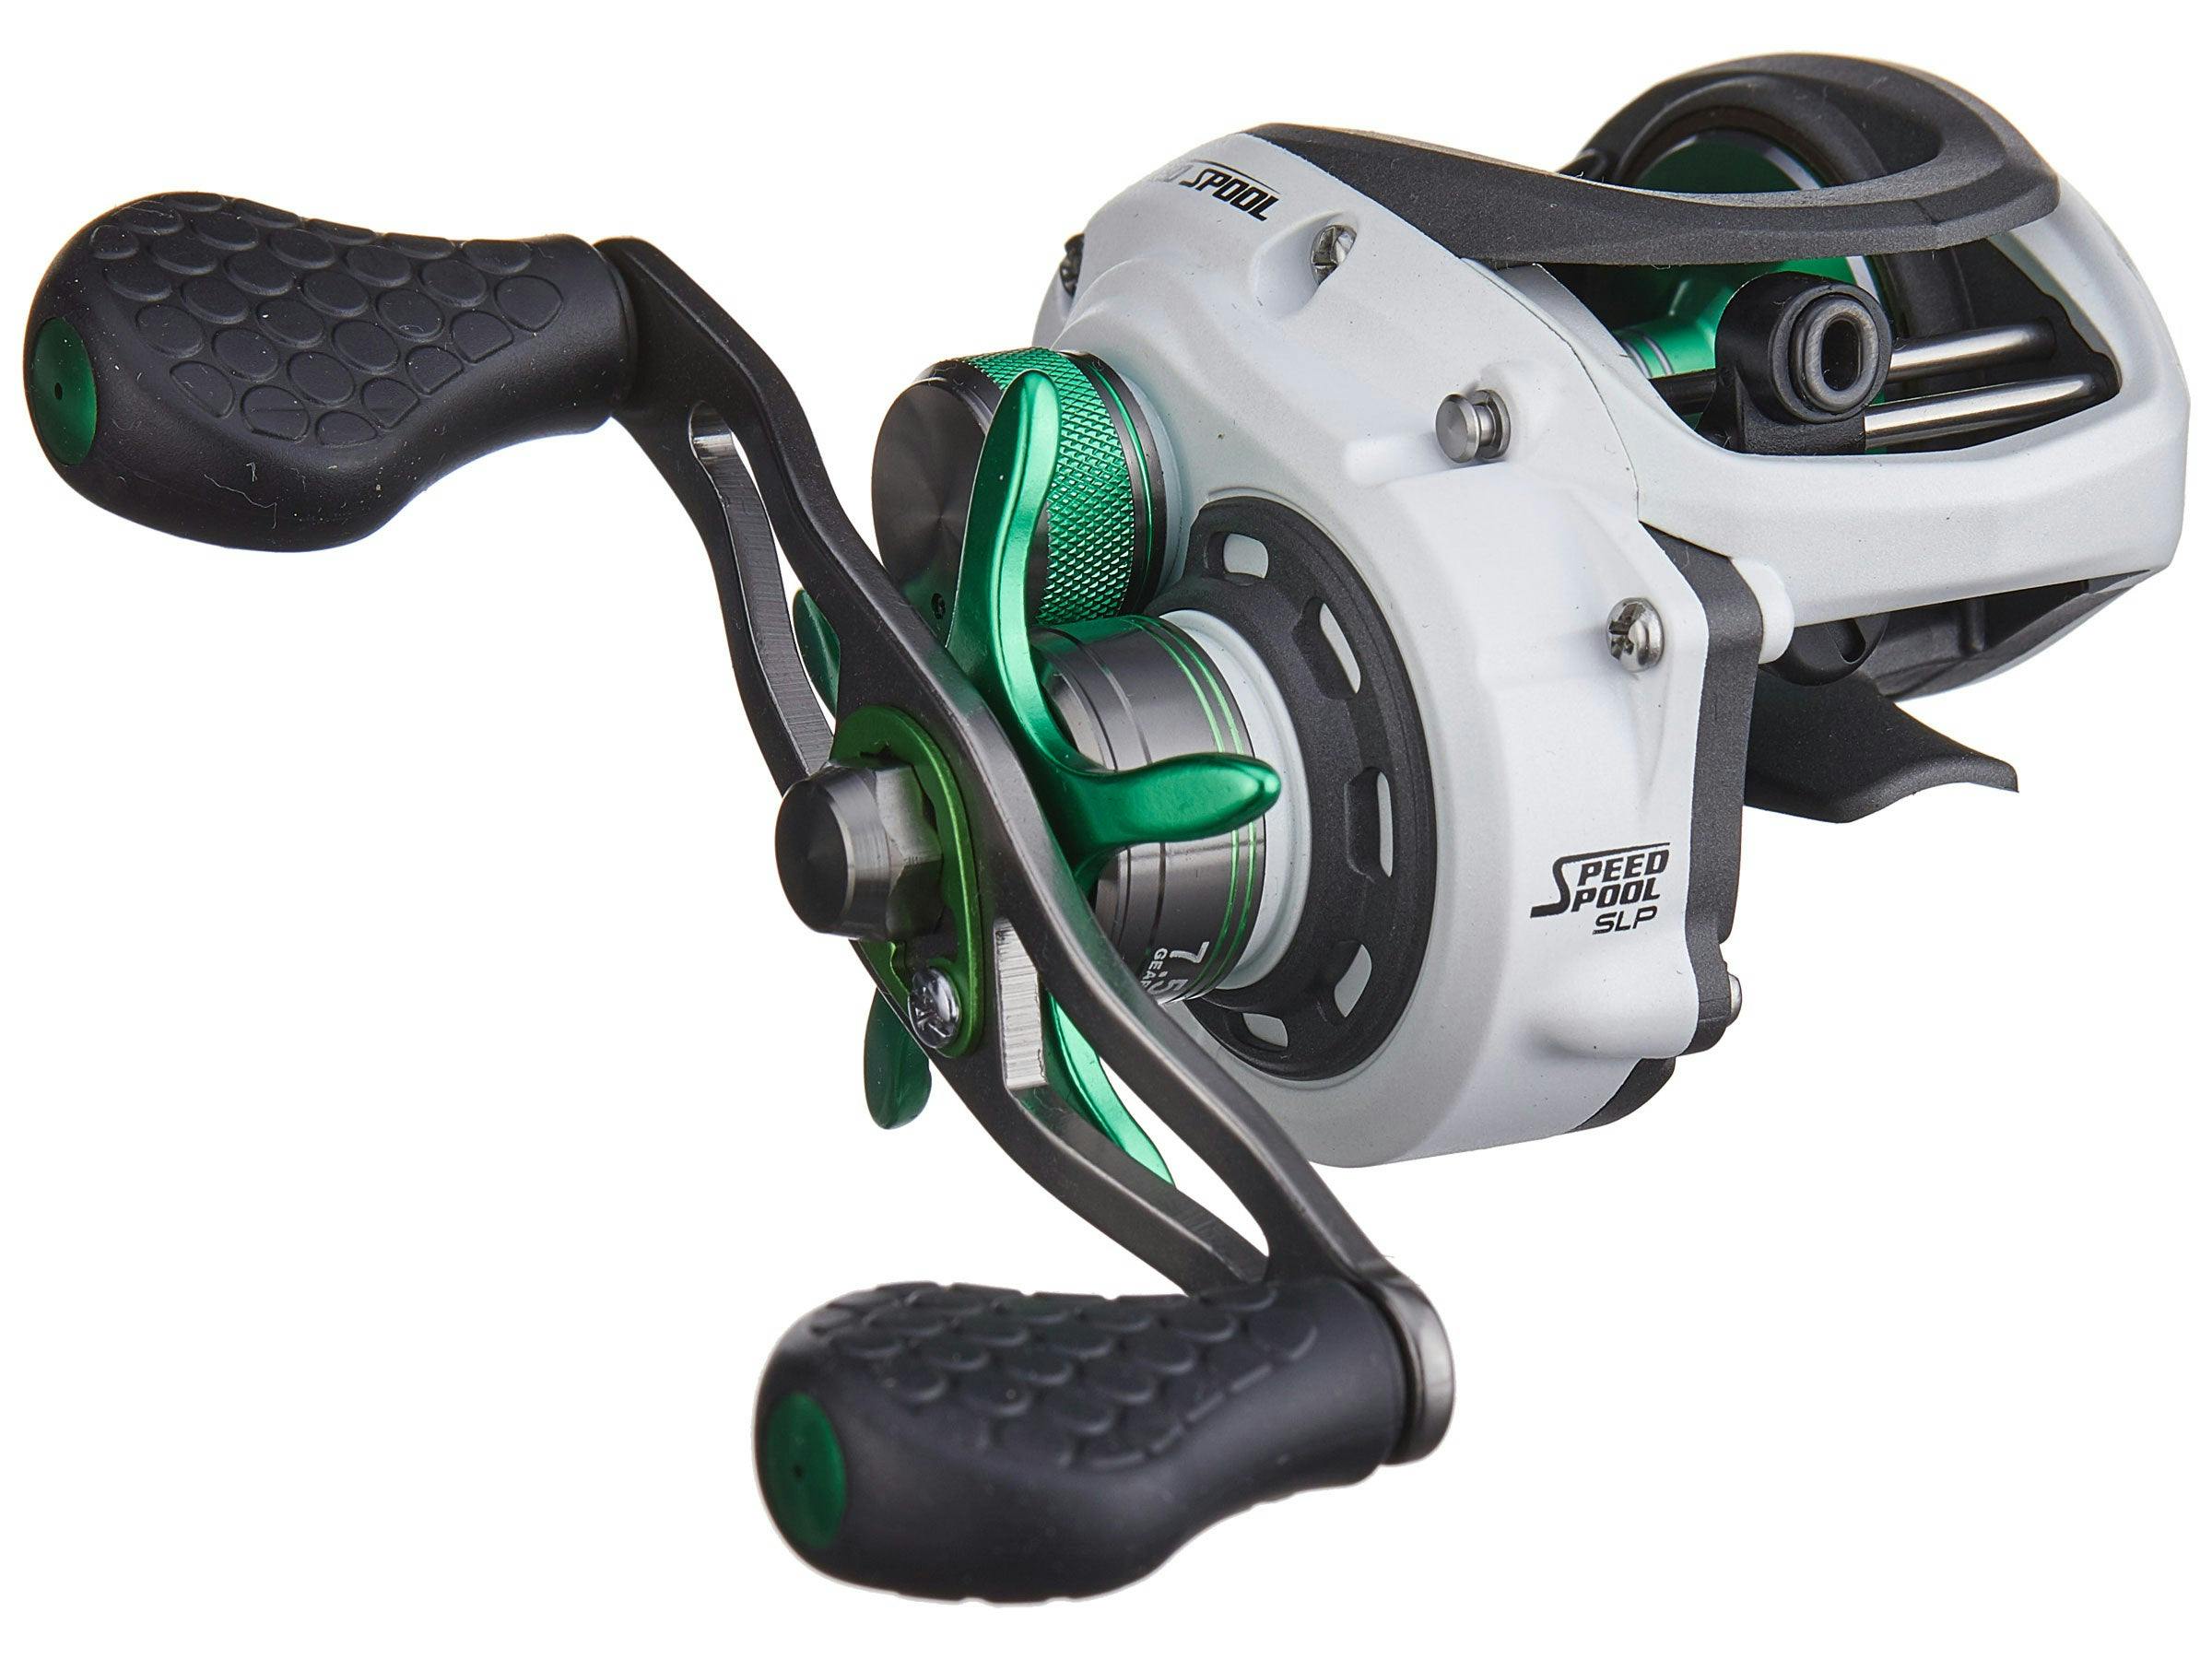 Reel Time Review of the Lew's Mach Smash Combo- Is this the best under $150  combo? 